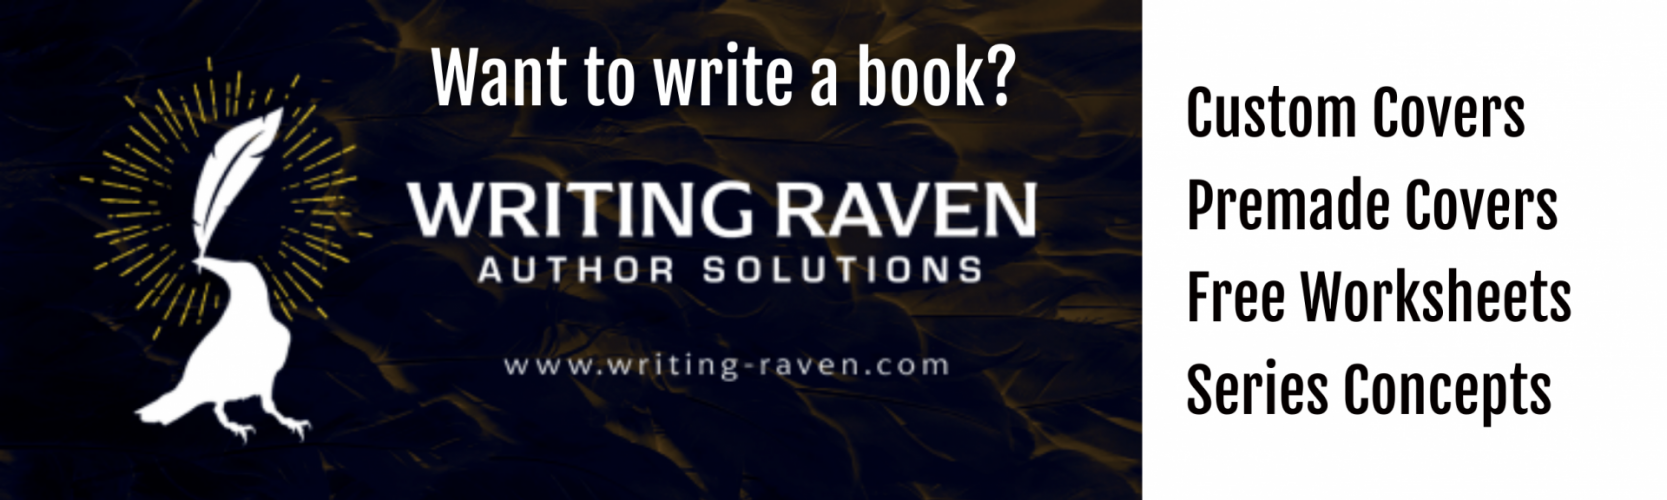 Writing Raven Author Solutions website for the writer who wants to sell